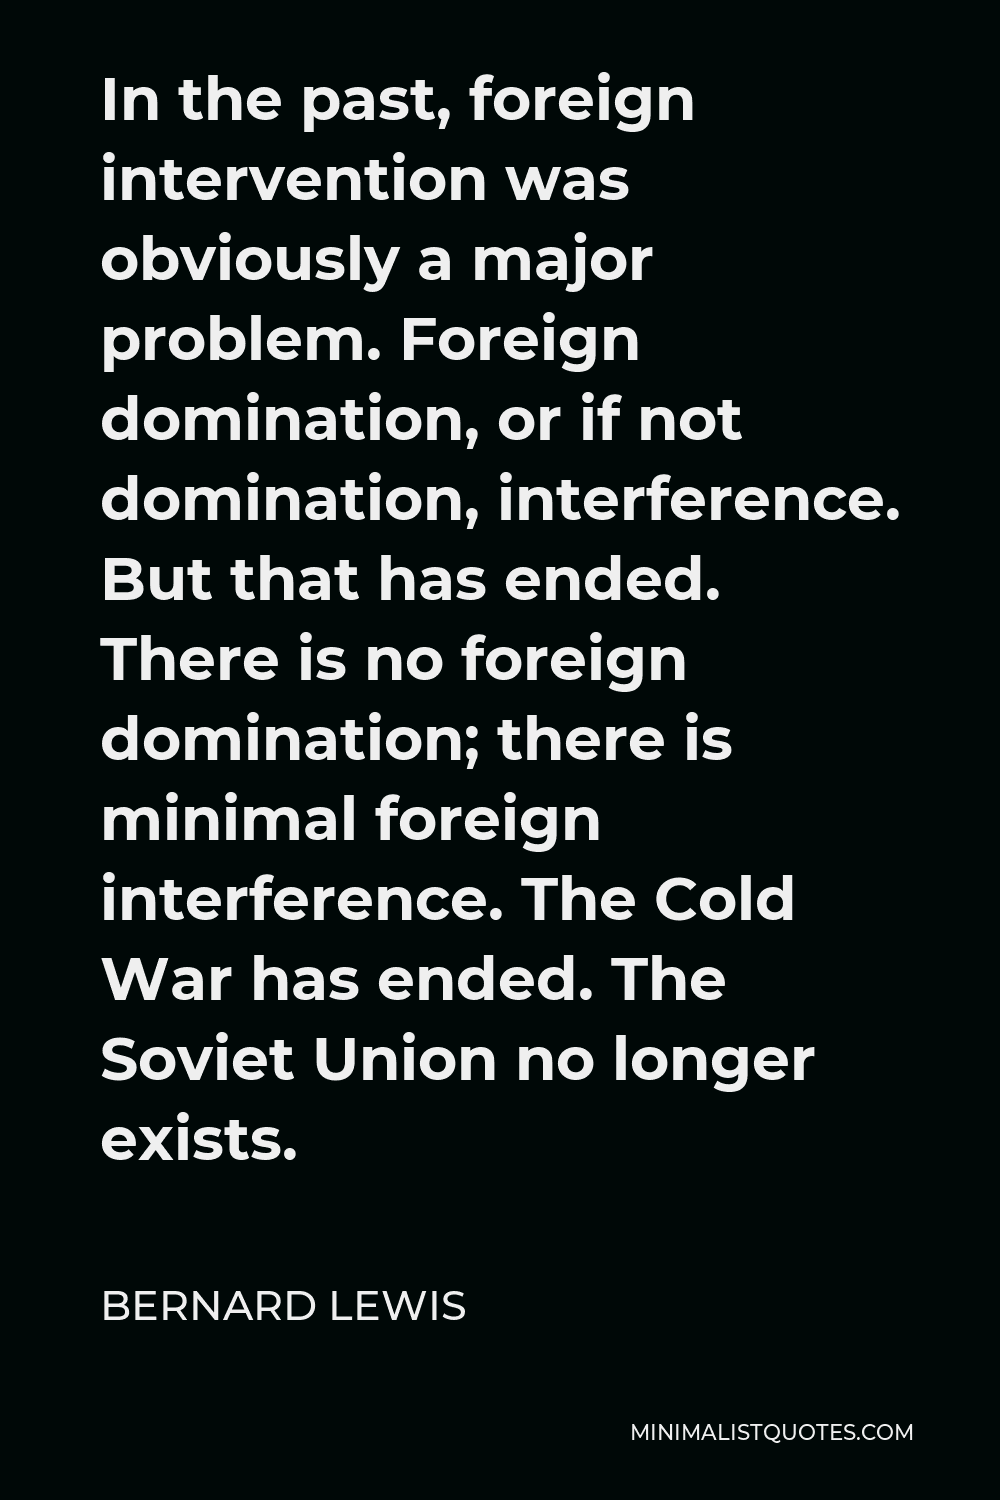 Bernard Lewis Quote - In the past, foreign intervention was obviously a major problem. Foreign domination, or if not domination, interference. But that has ended. There is no foreign domination; there is minimal foreign interference. The Cold War has ended. The Soviet Union no longer exists.